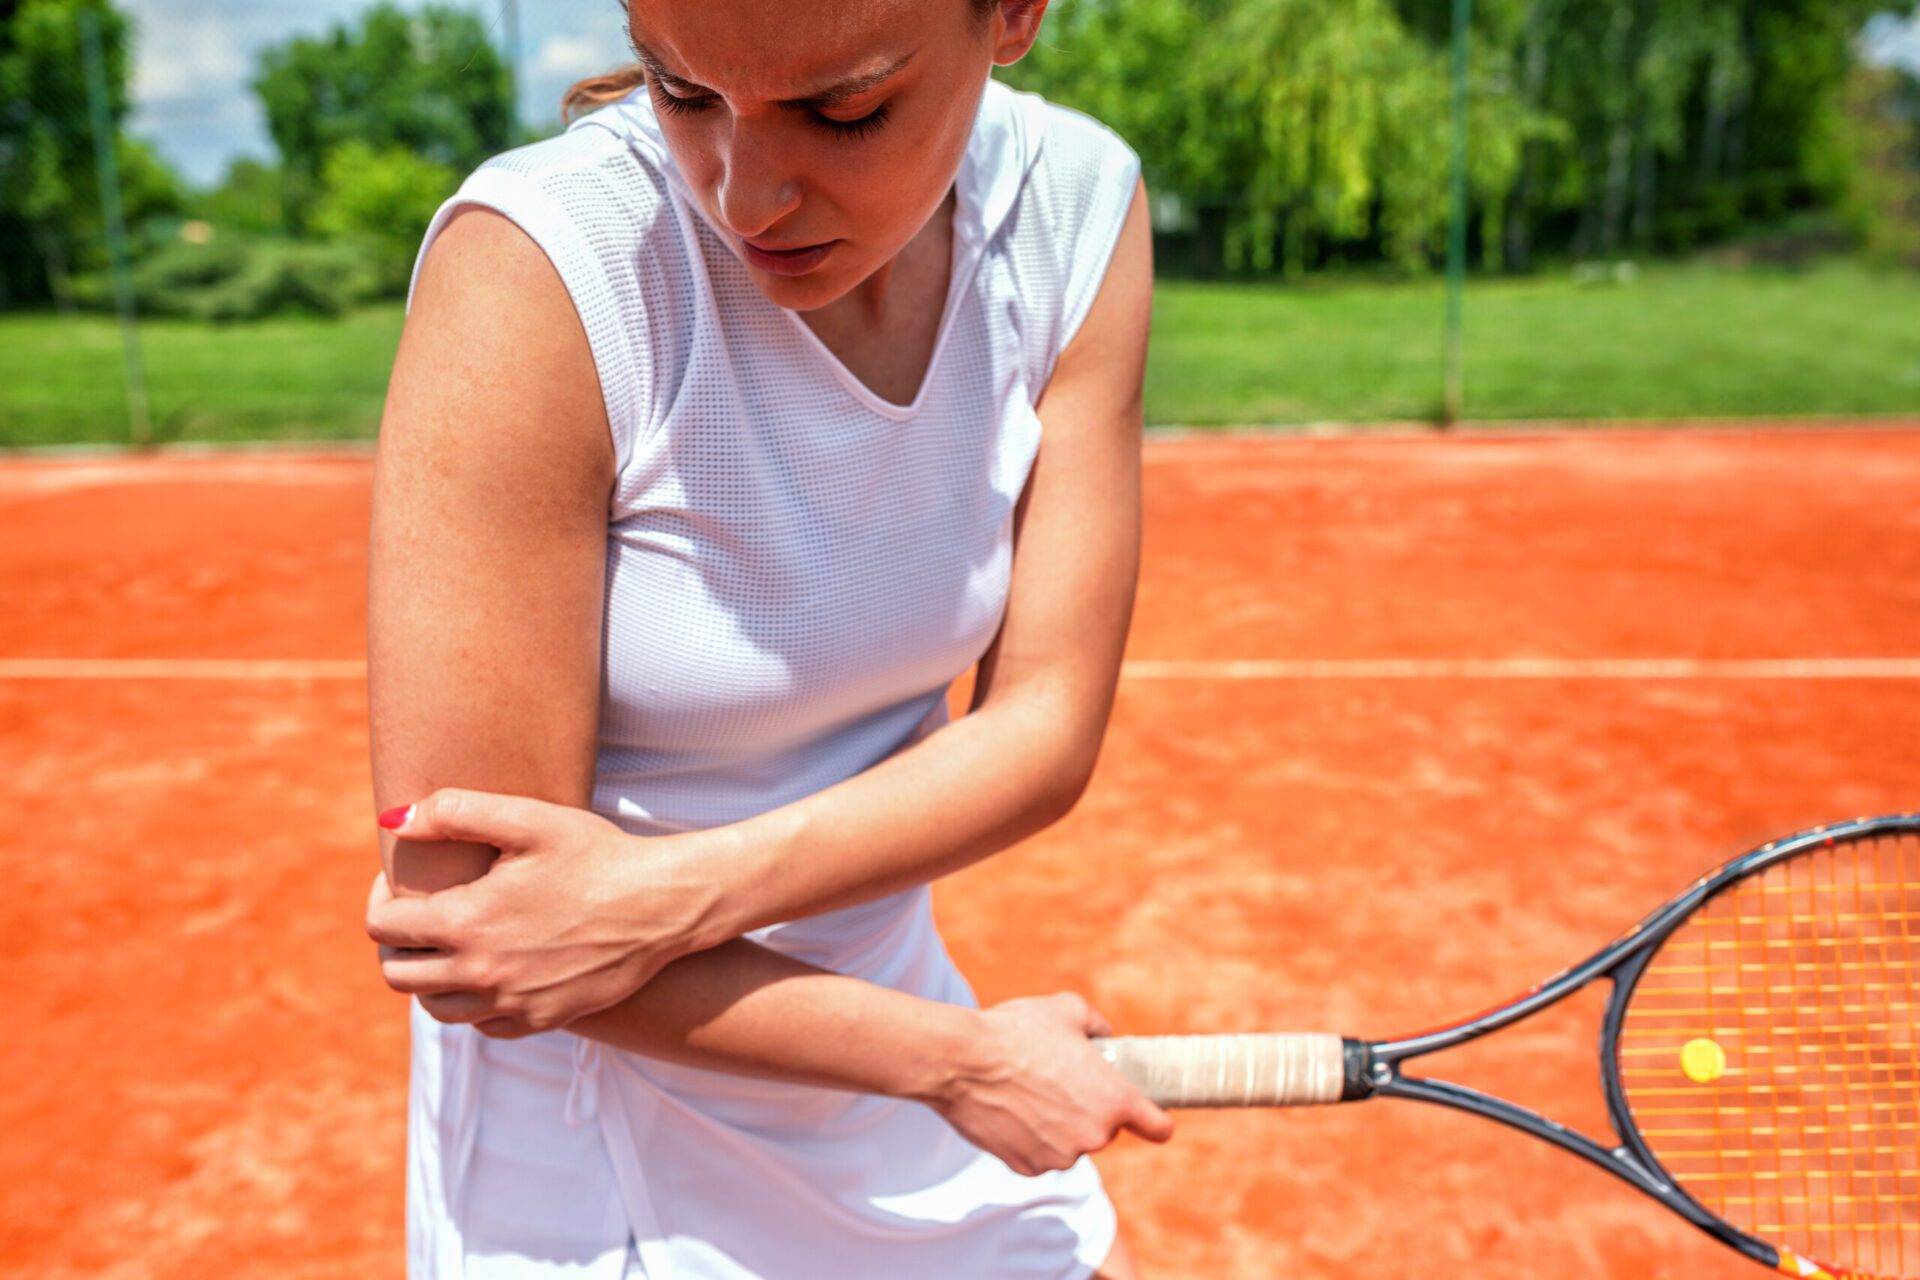 Elbow injury in tennis, unpleasant facial expression